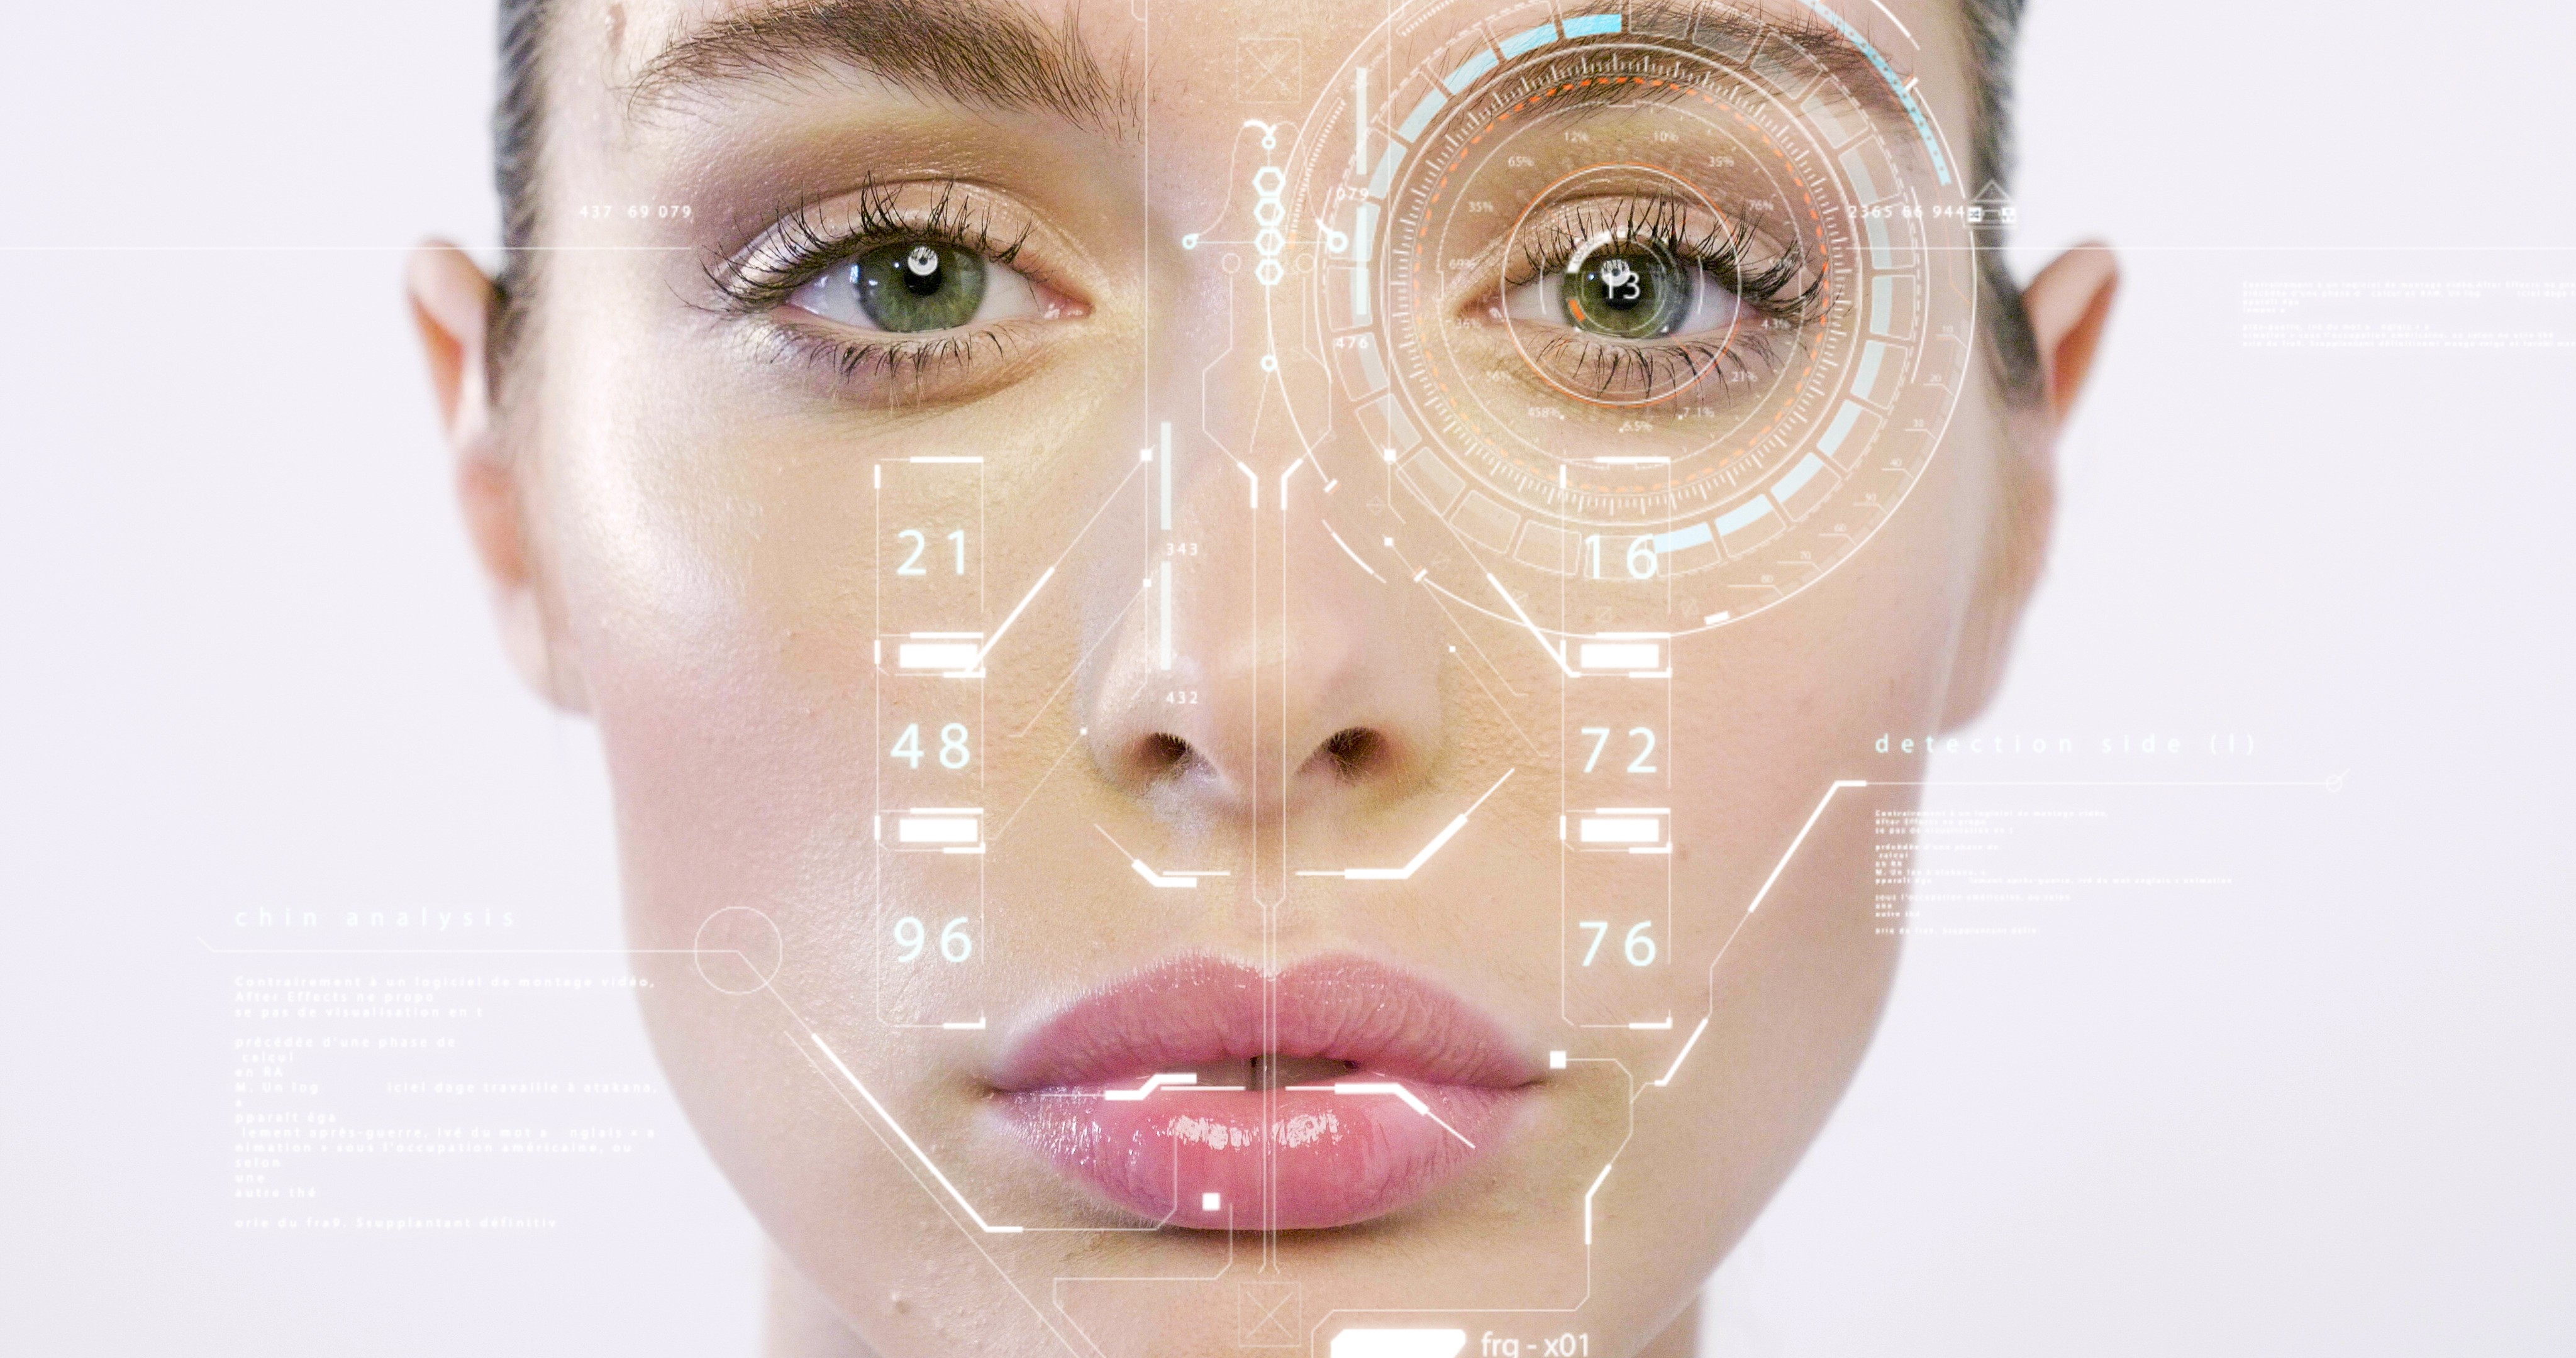 Advances in AI could mean faces will be used instead of credit cards in the future. Photo: Shutterstock